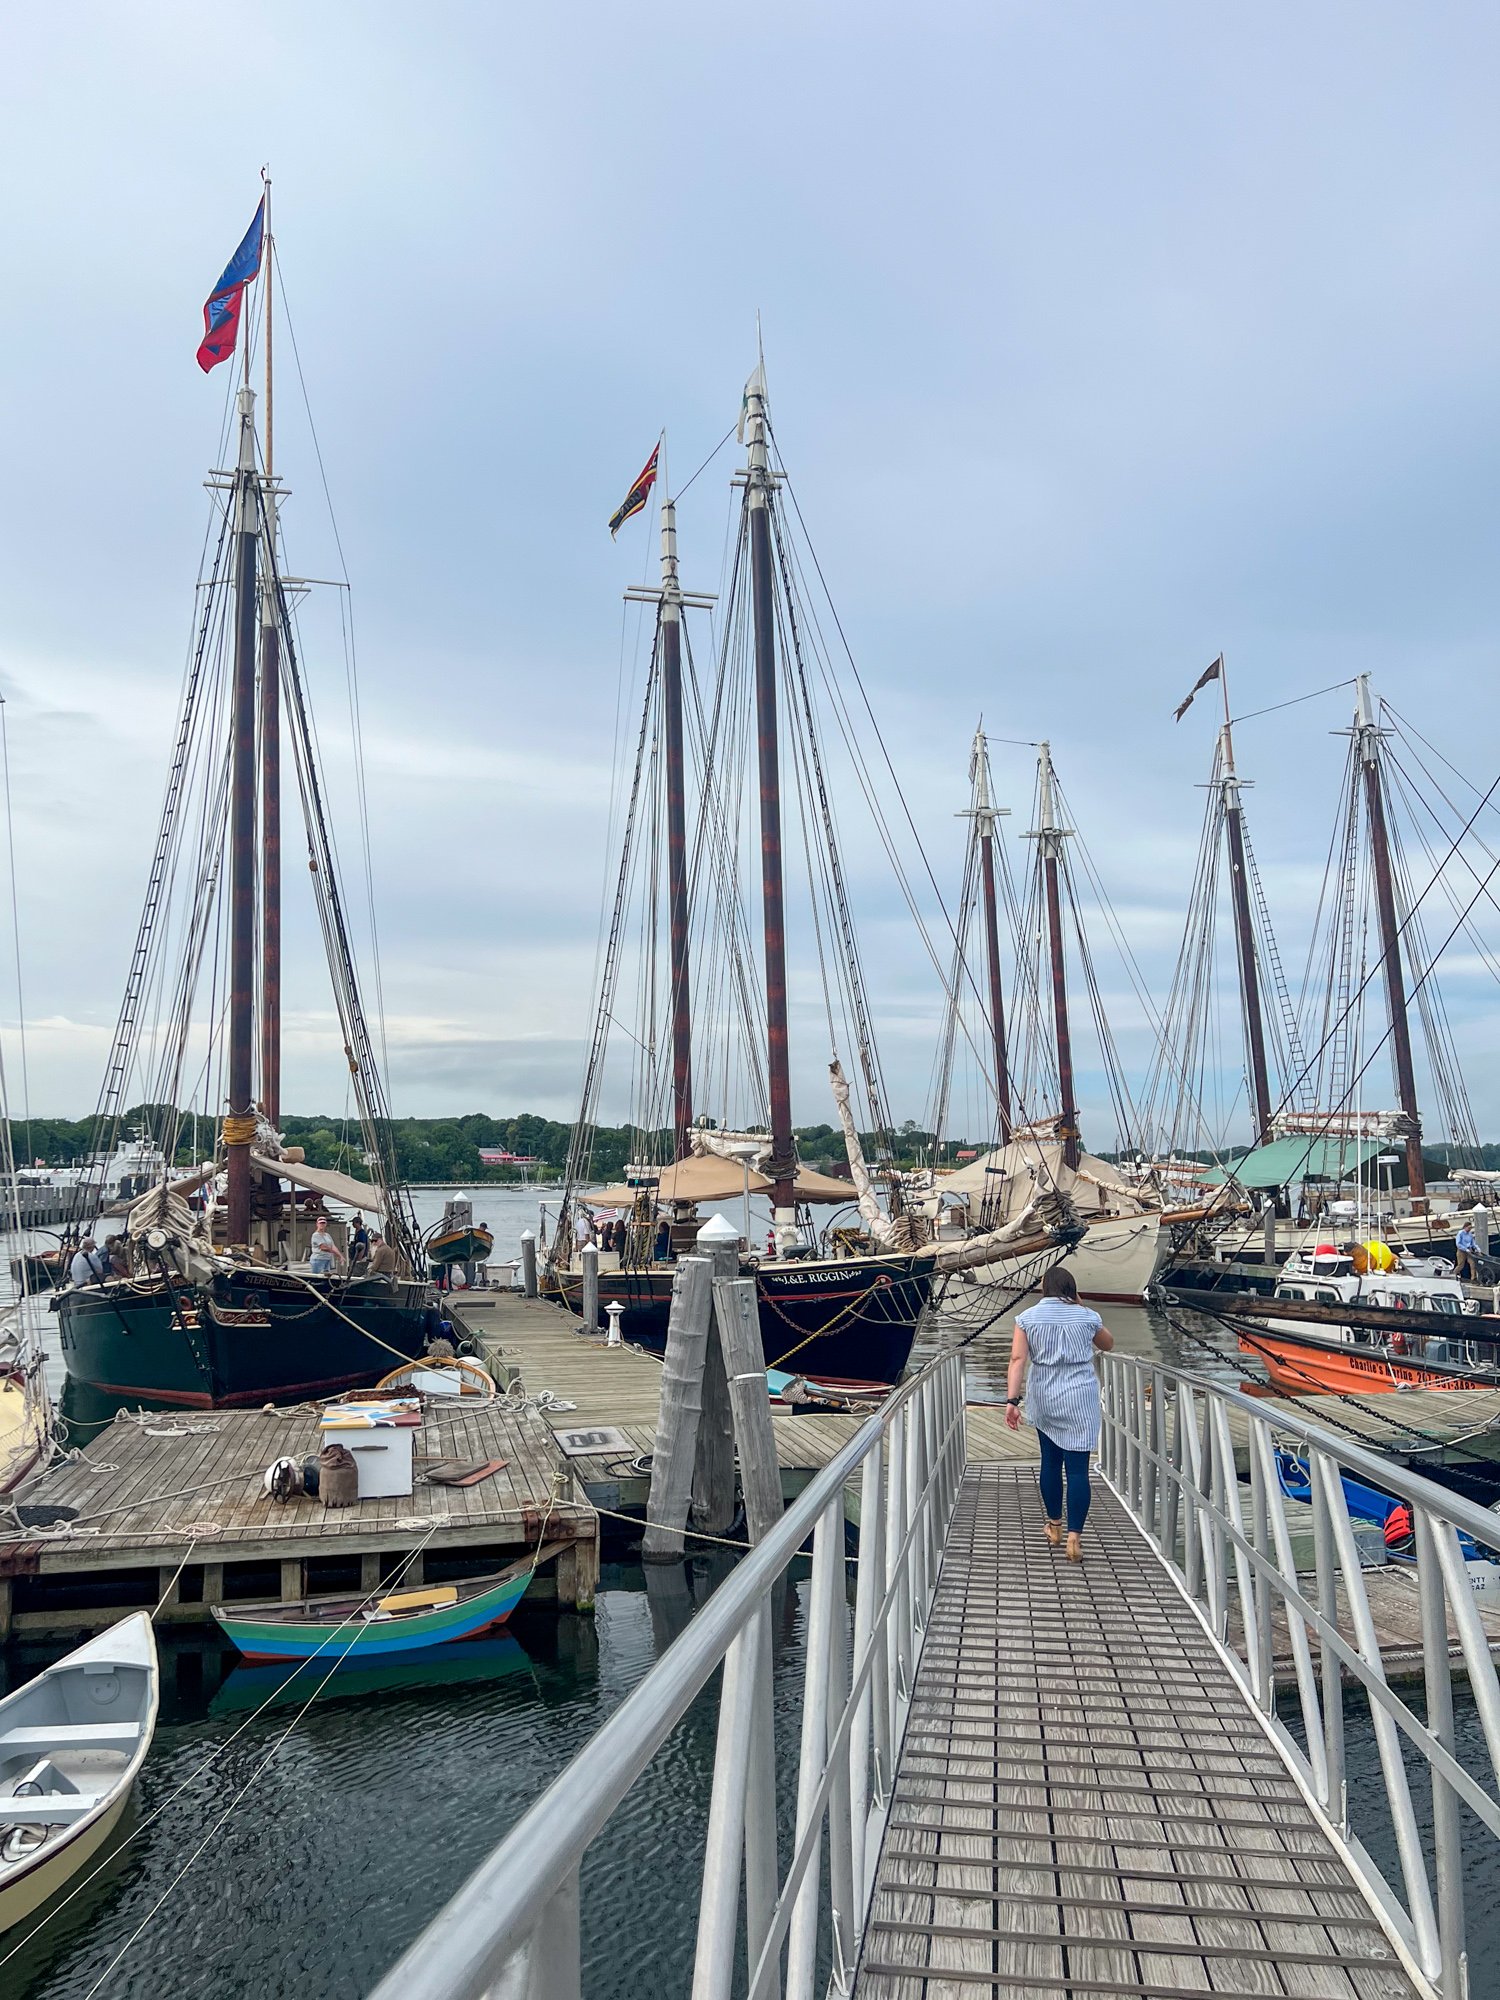 Five Maine windjammer cruises operate out of Rockland Harbor.